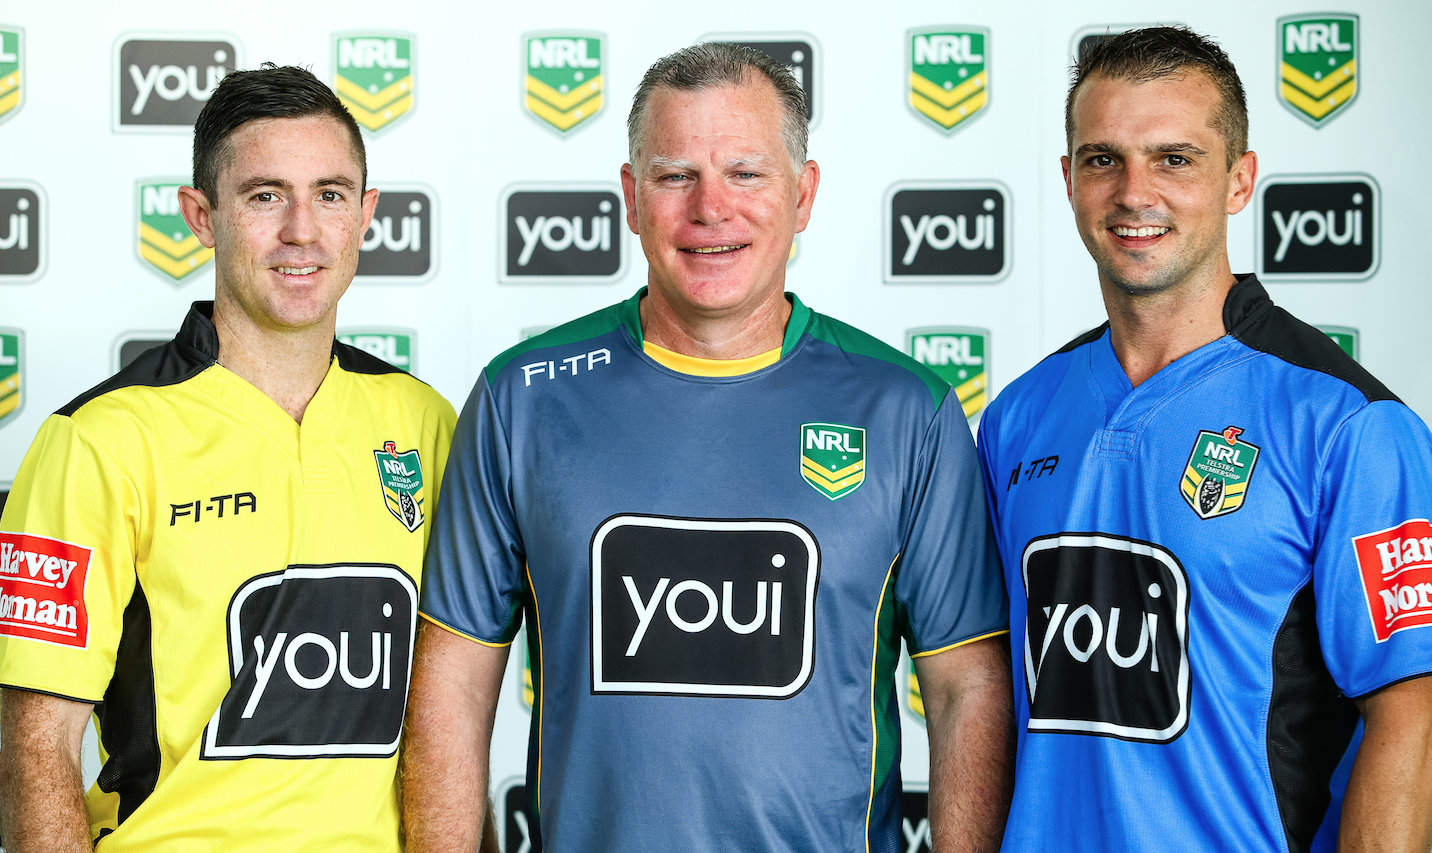 Youi partners with NRL as new sponsor 